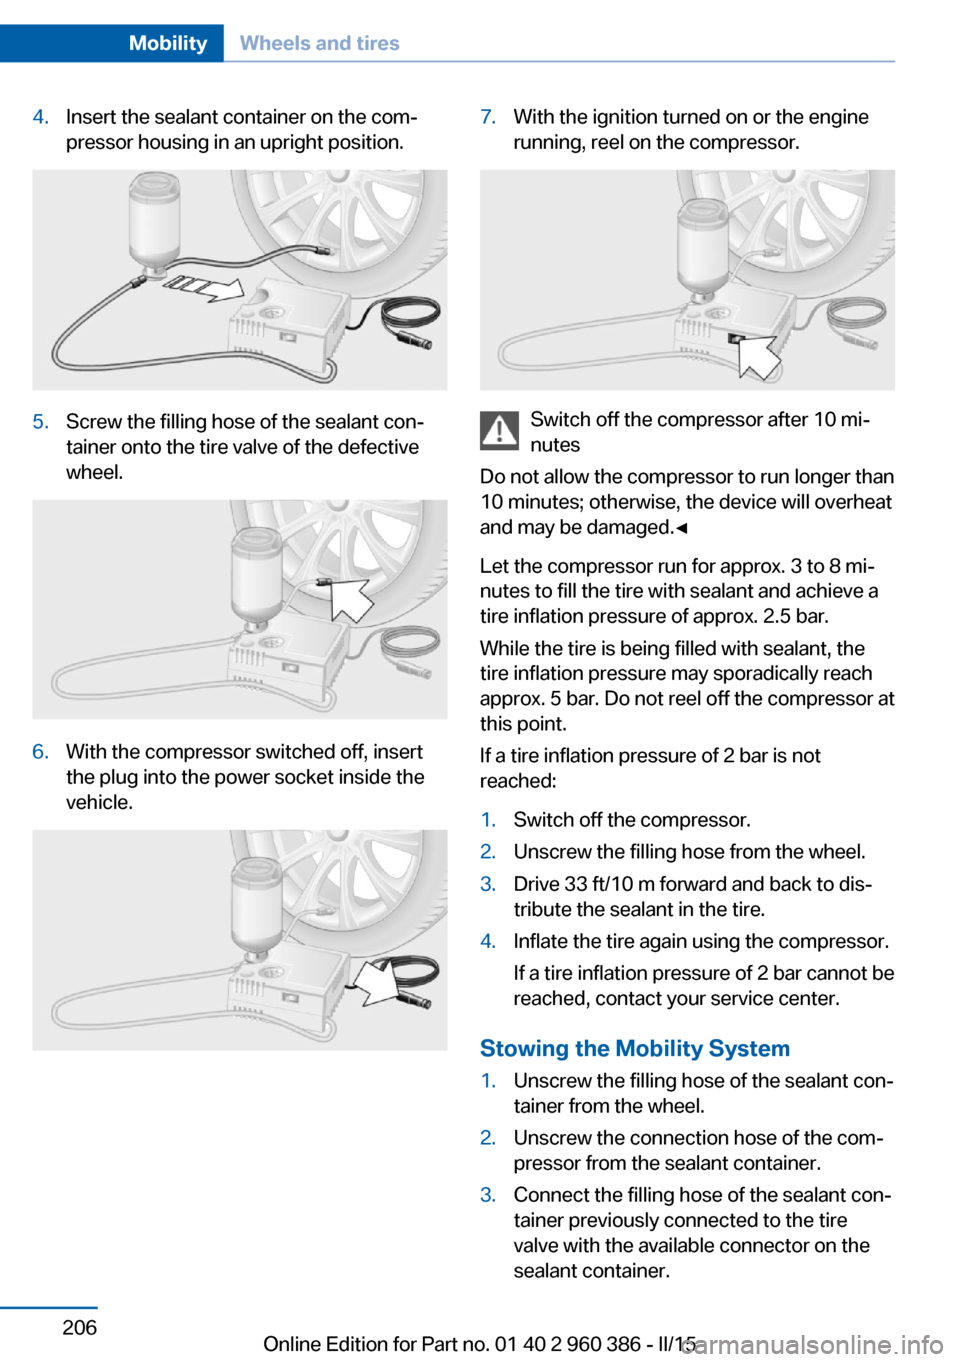 BMW X3 2016 F25 Owners Guide 4.Insert the sealant container on the com‐
pressor housing in an upright position.5.Screw the filling hose of the sealant con‐
tainer onto the tire valve of the defective
wheel.6.With the compress